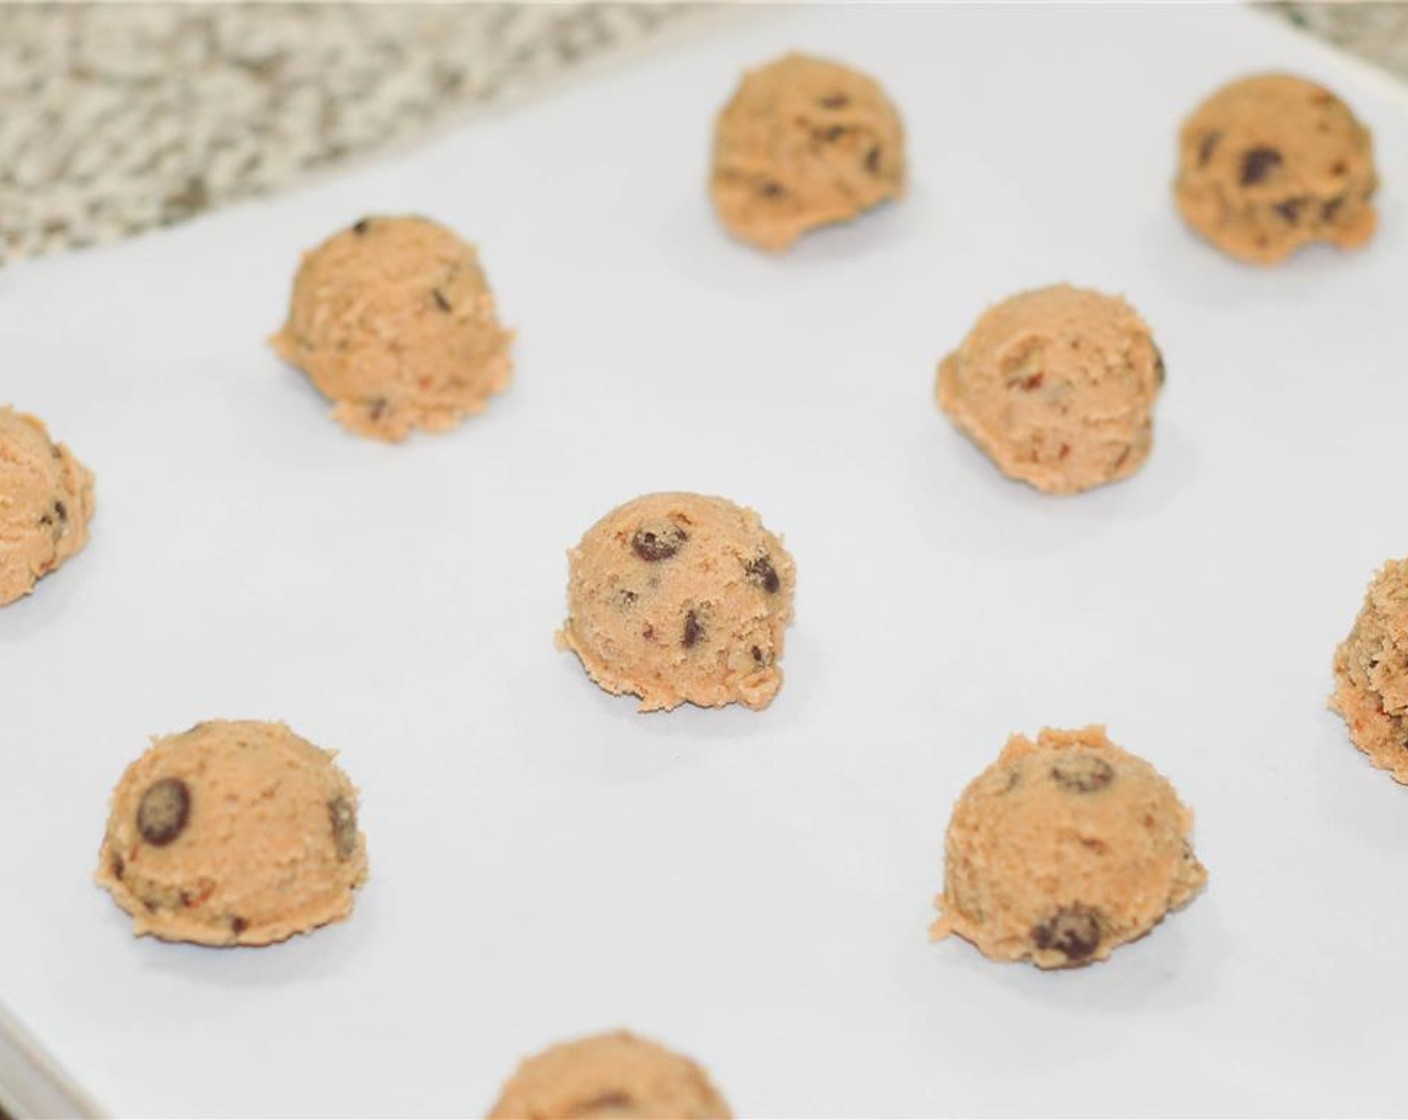 step 4 With a cookie scoop, place cookie dough mounds on a parchment lined, or greased, baking sheet, 2 inches apart. Bake 10 minutes, or until tops are golden brown. Cool for 2 minutes on sheet, then move them to a cooling rack. Enjoy!